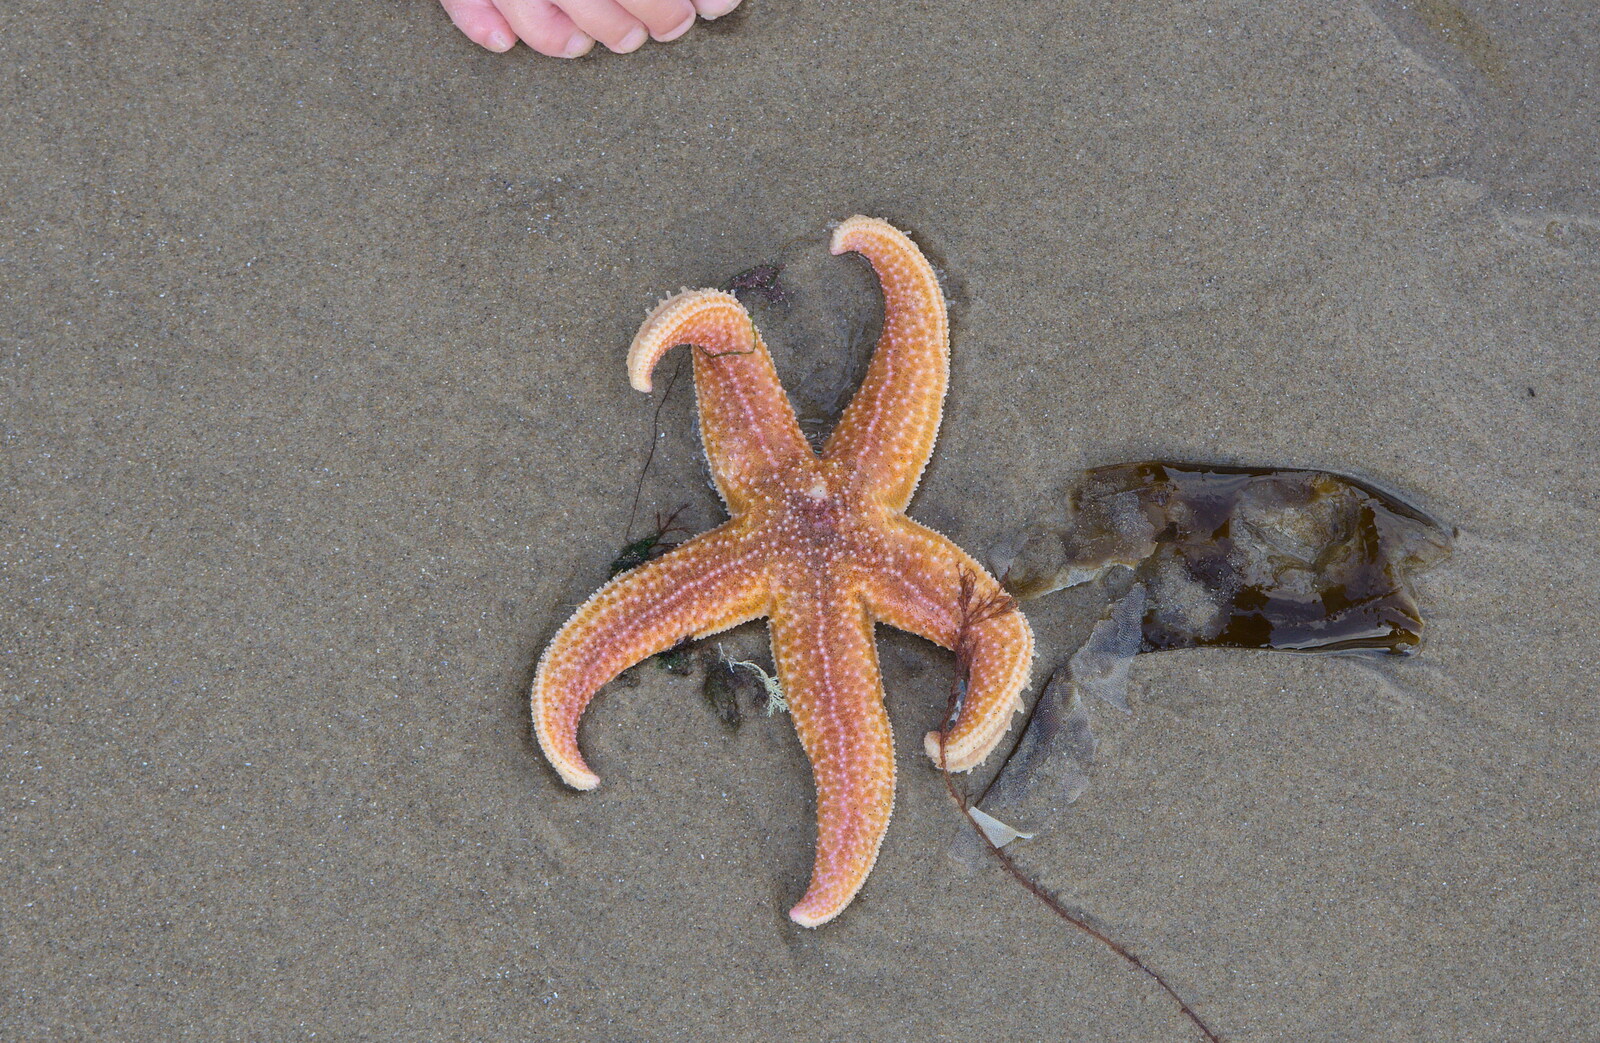 A Sea Star is found on the beach from Camping at Silver Strand, Wicklow, County Wicklow, Ireland - 7th August 2014